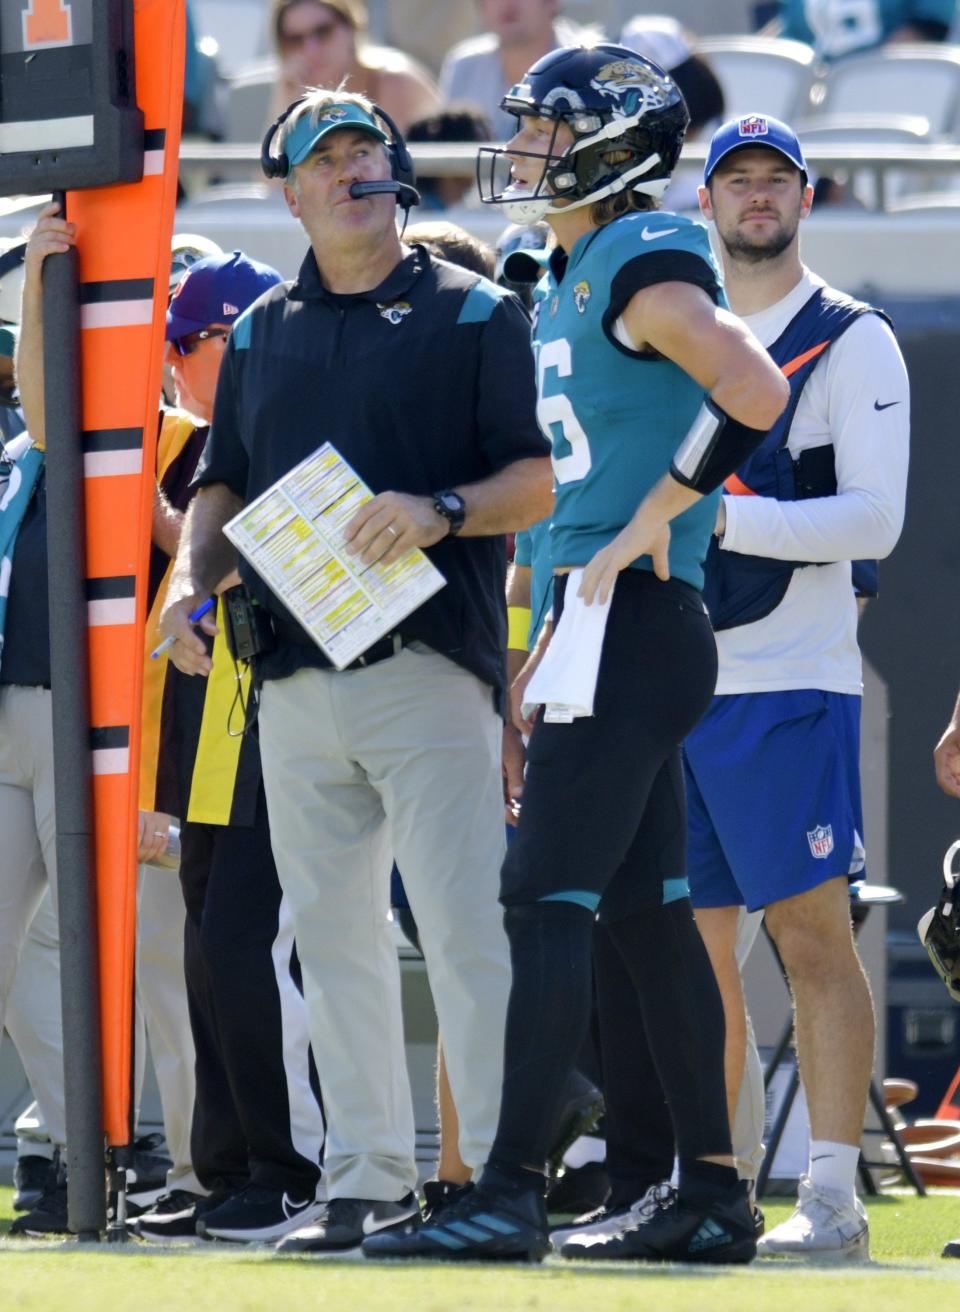 Trevor Lawrence and the Jacksonville Jaguars are underdogs in their NFL Week 6 game against the Indianapolis Colts.